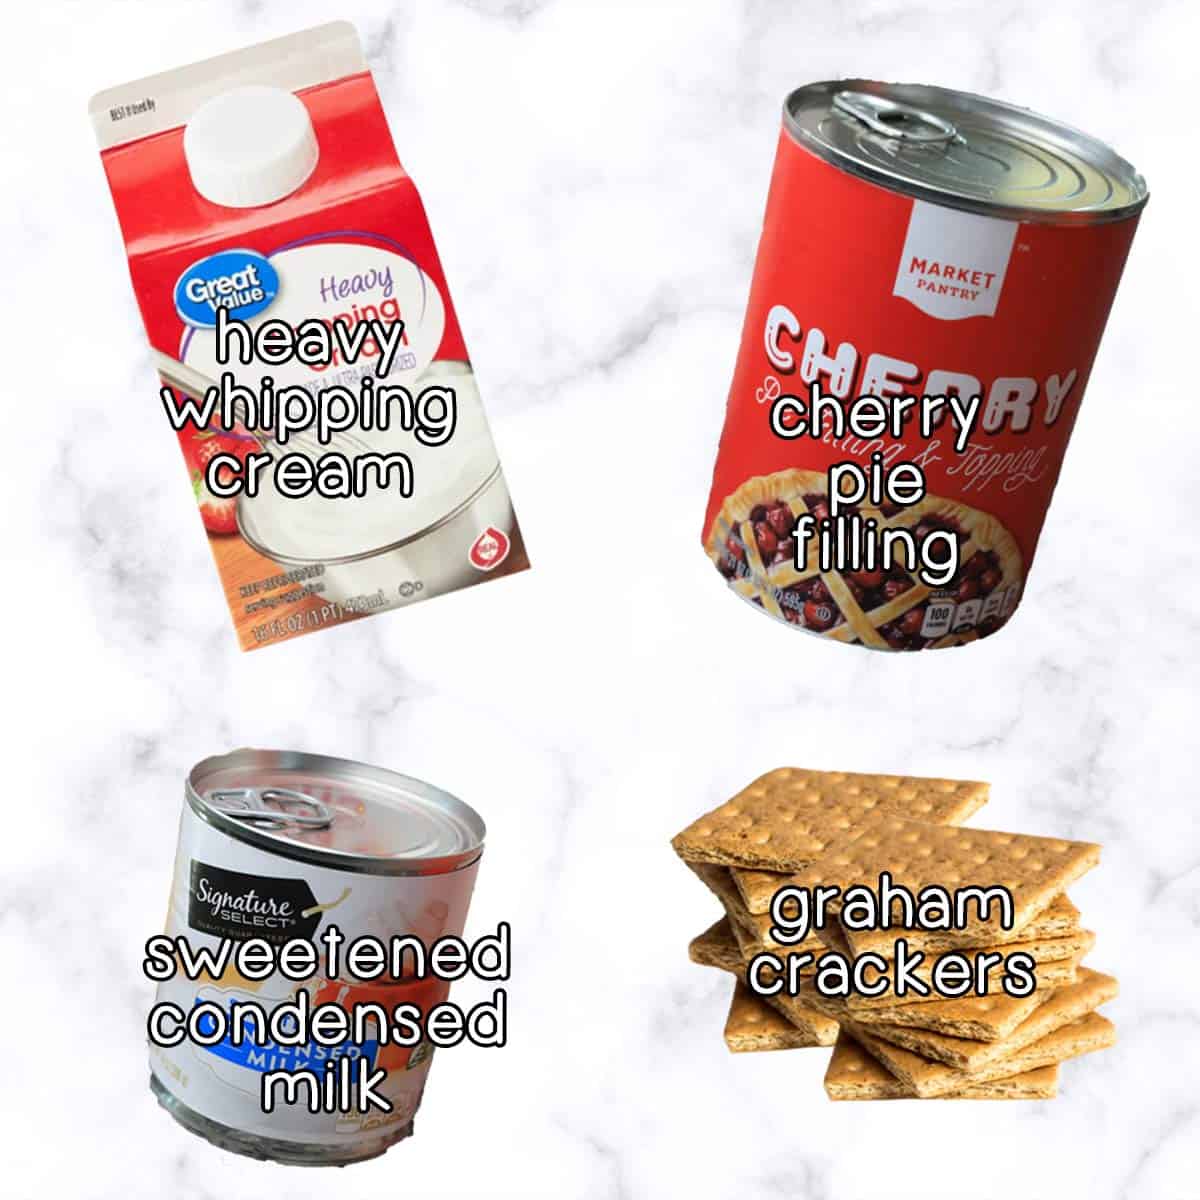 Edited image of ingredients with text - heavy whipping cream, cherry pie filling, sweetened condensed milk, and graham crackers.